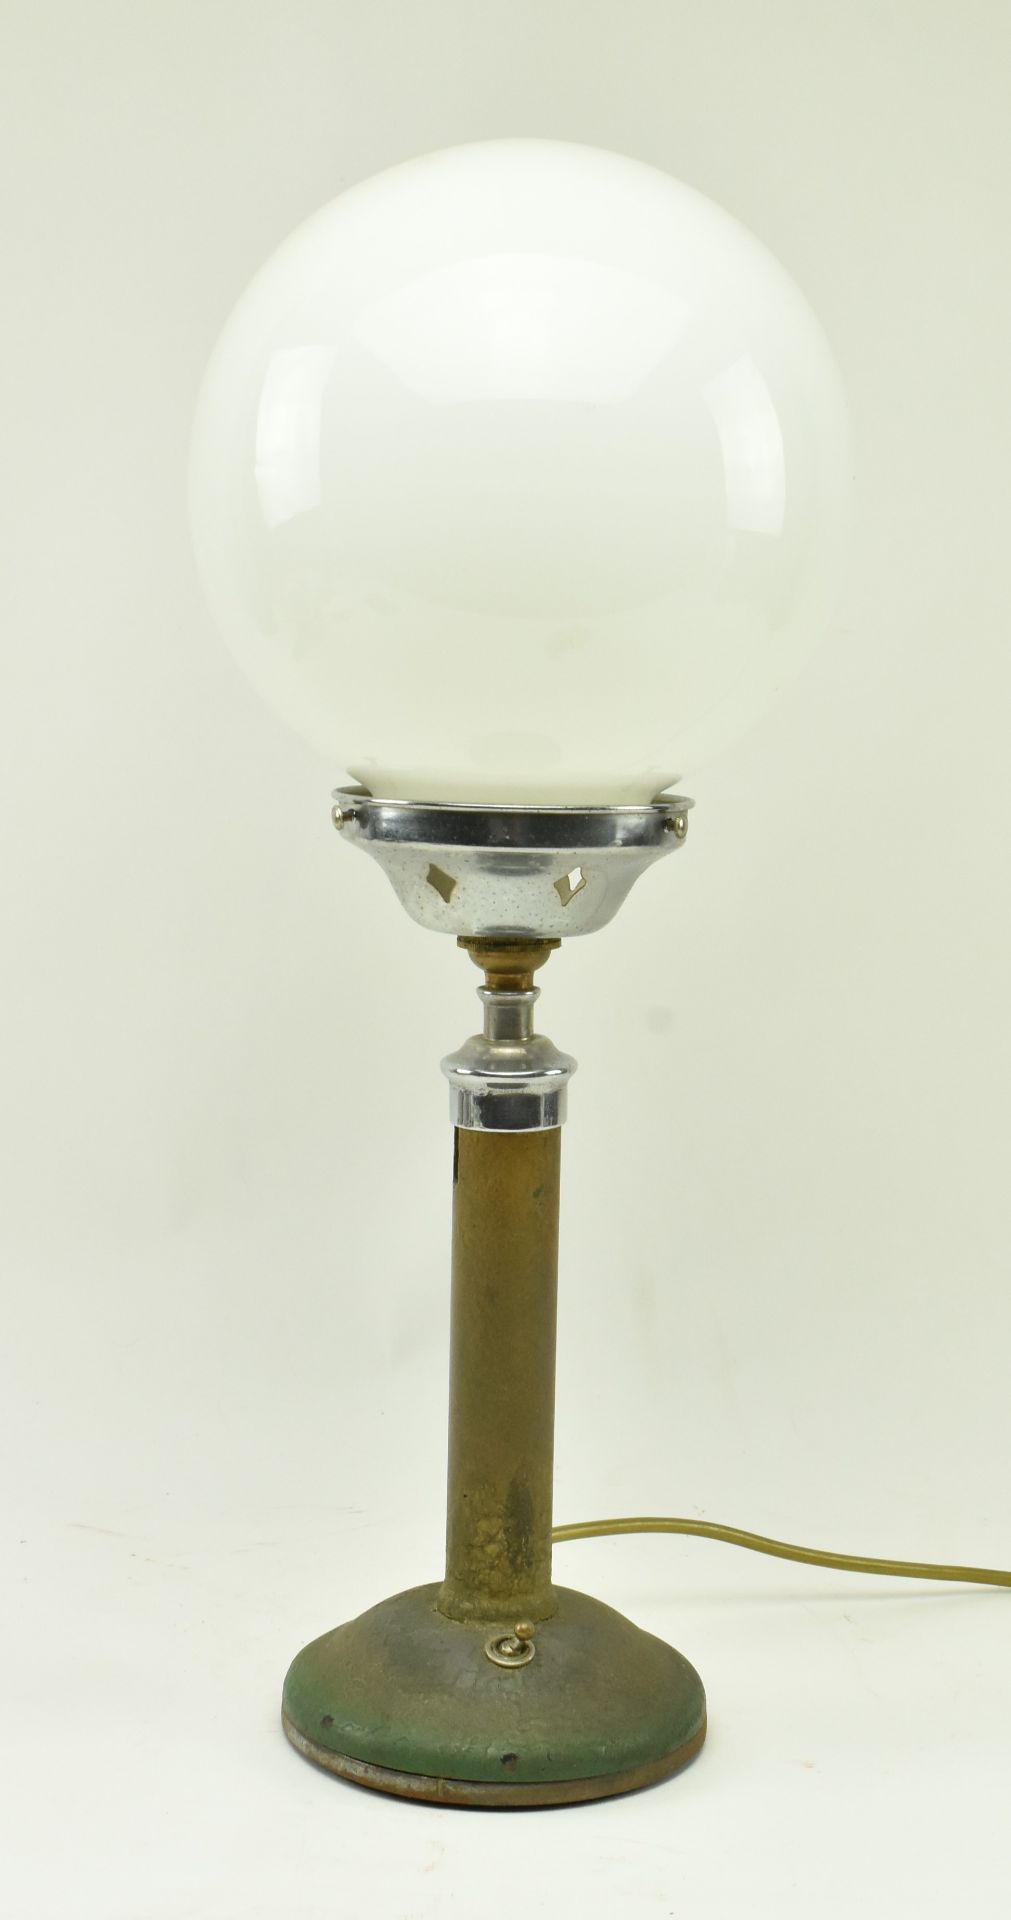 20TH CENTURY ART DECO INDUSTRIAL DESK / TABLE LAMP - Image 2 of 6